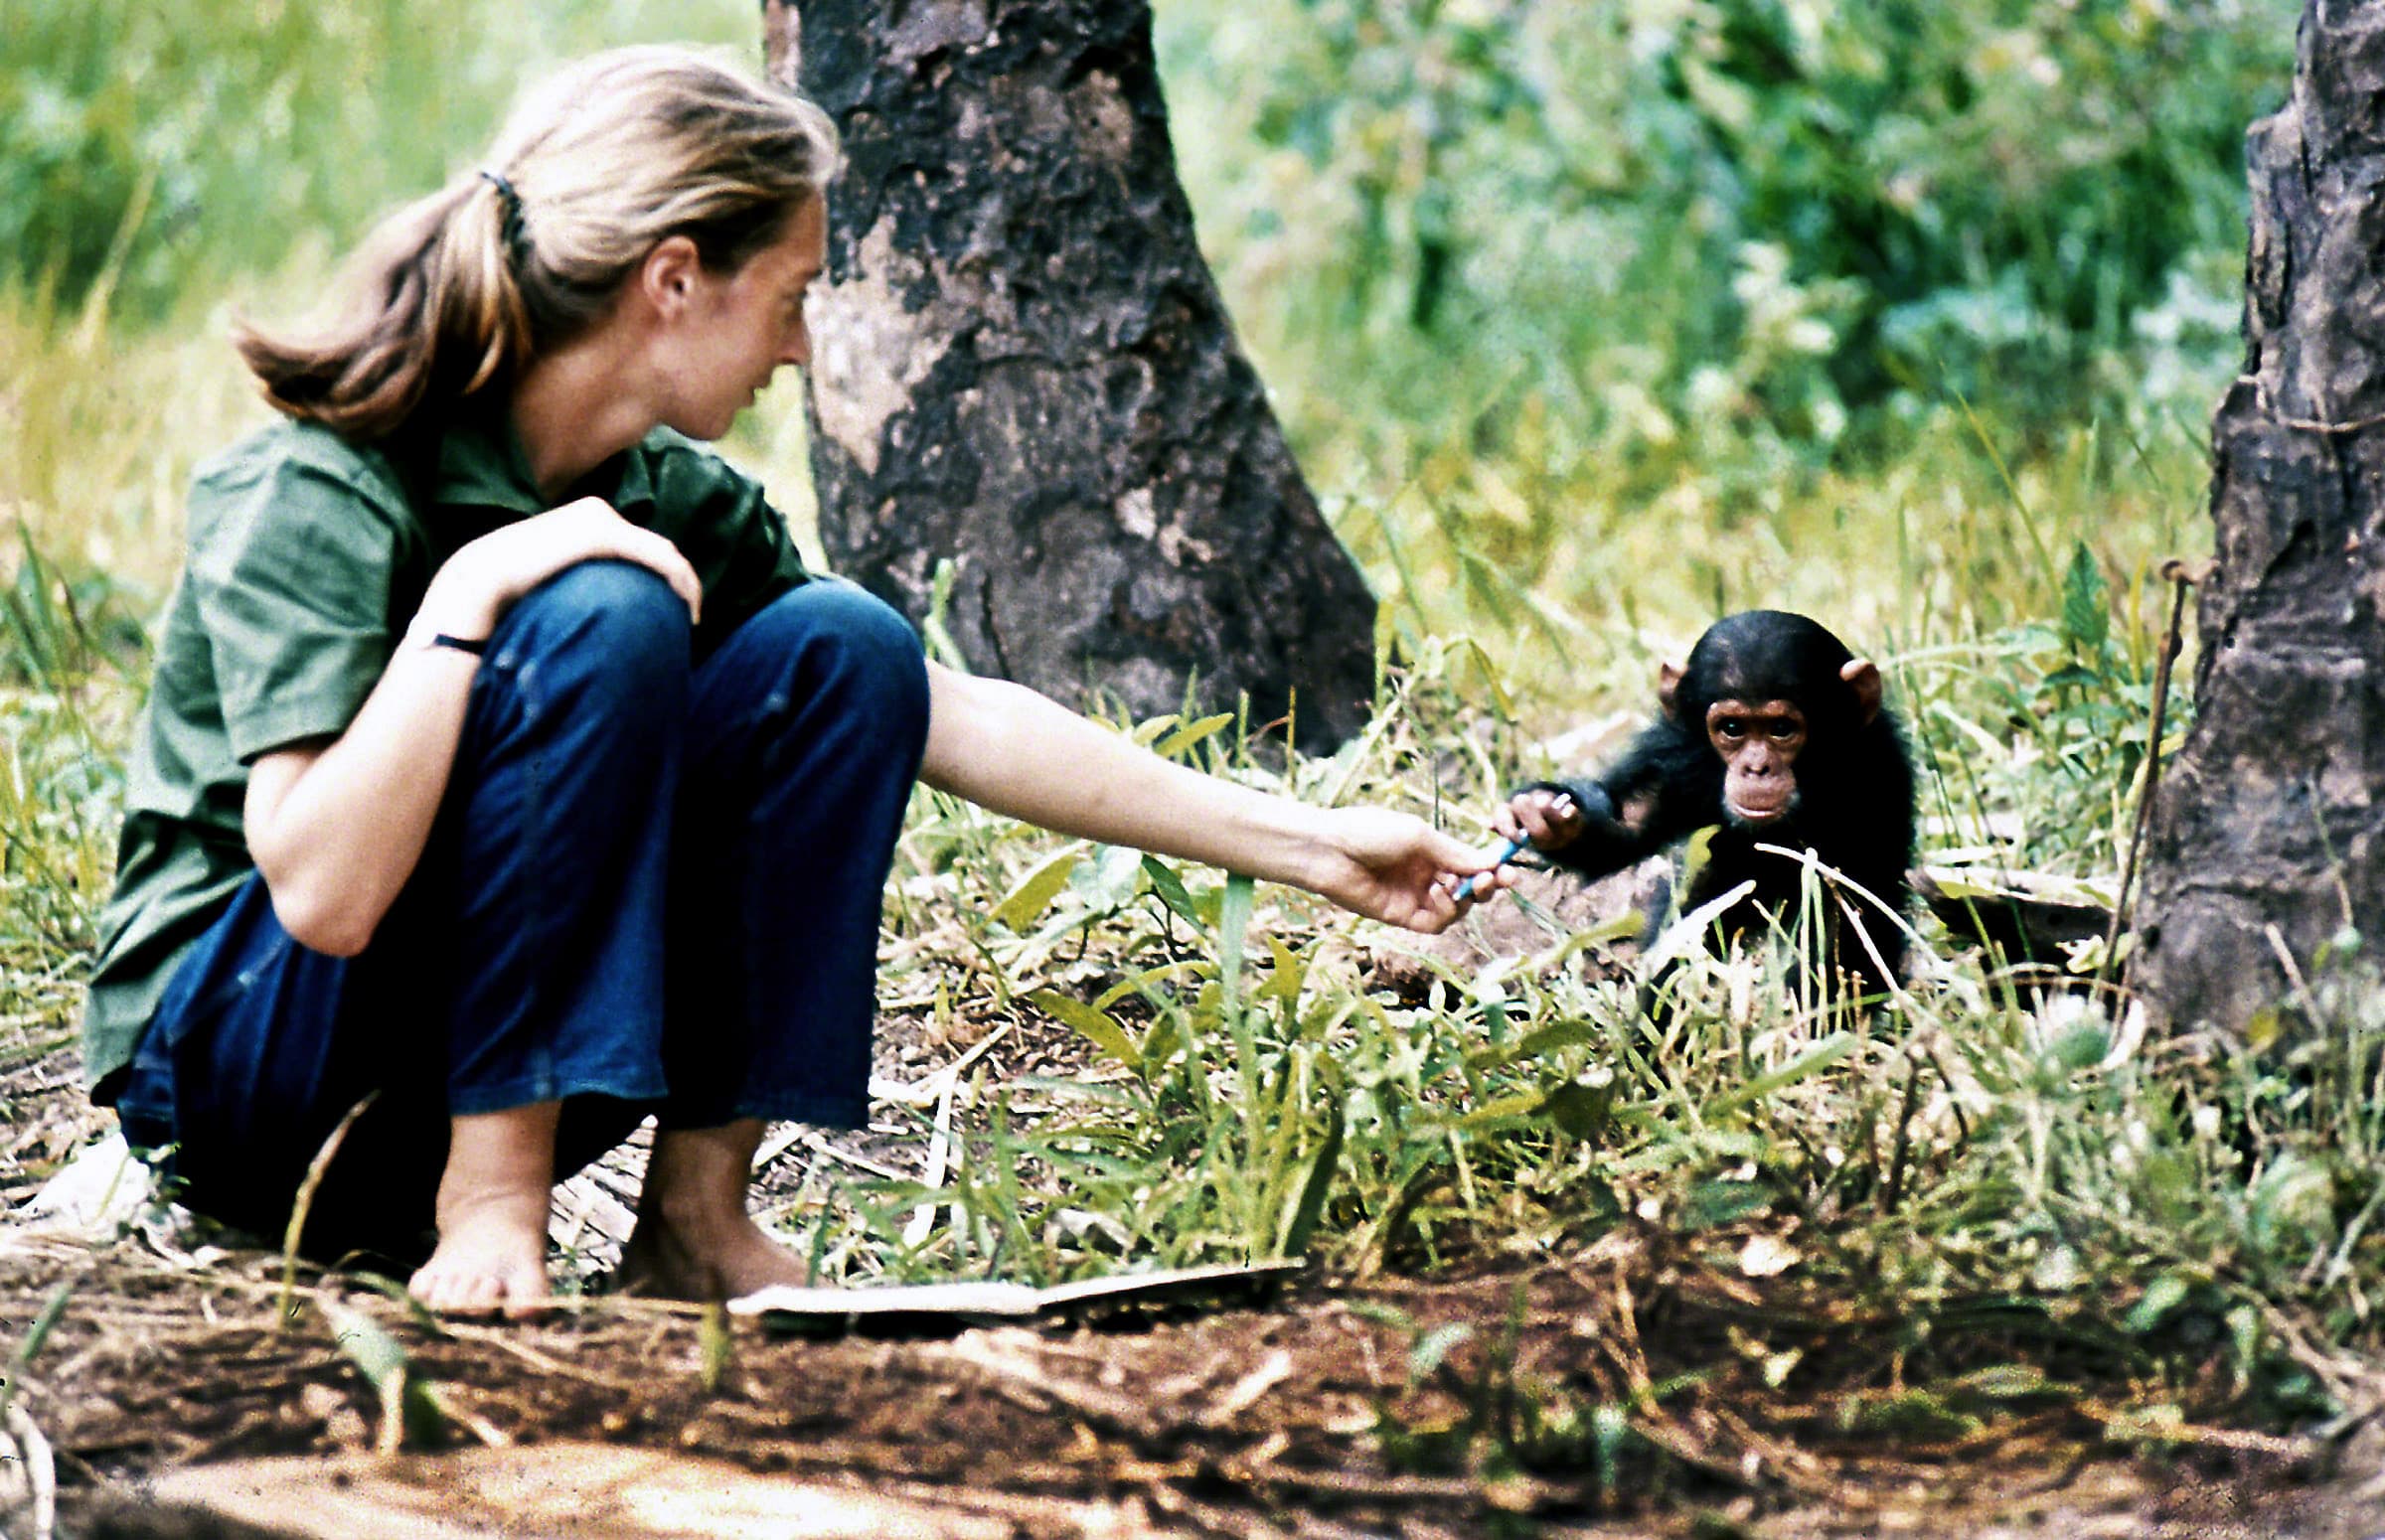 Young researcher Jane Goodall with baby chimpanzee Flint at Gombe Stream Reasearch Center in Tanzania. (© The Jane Goodall Institute/Hugo van Lawick)